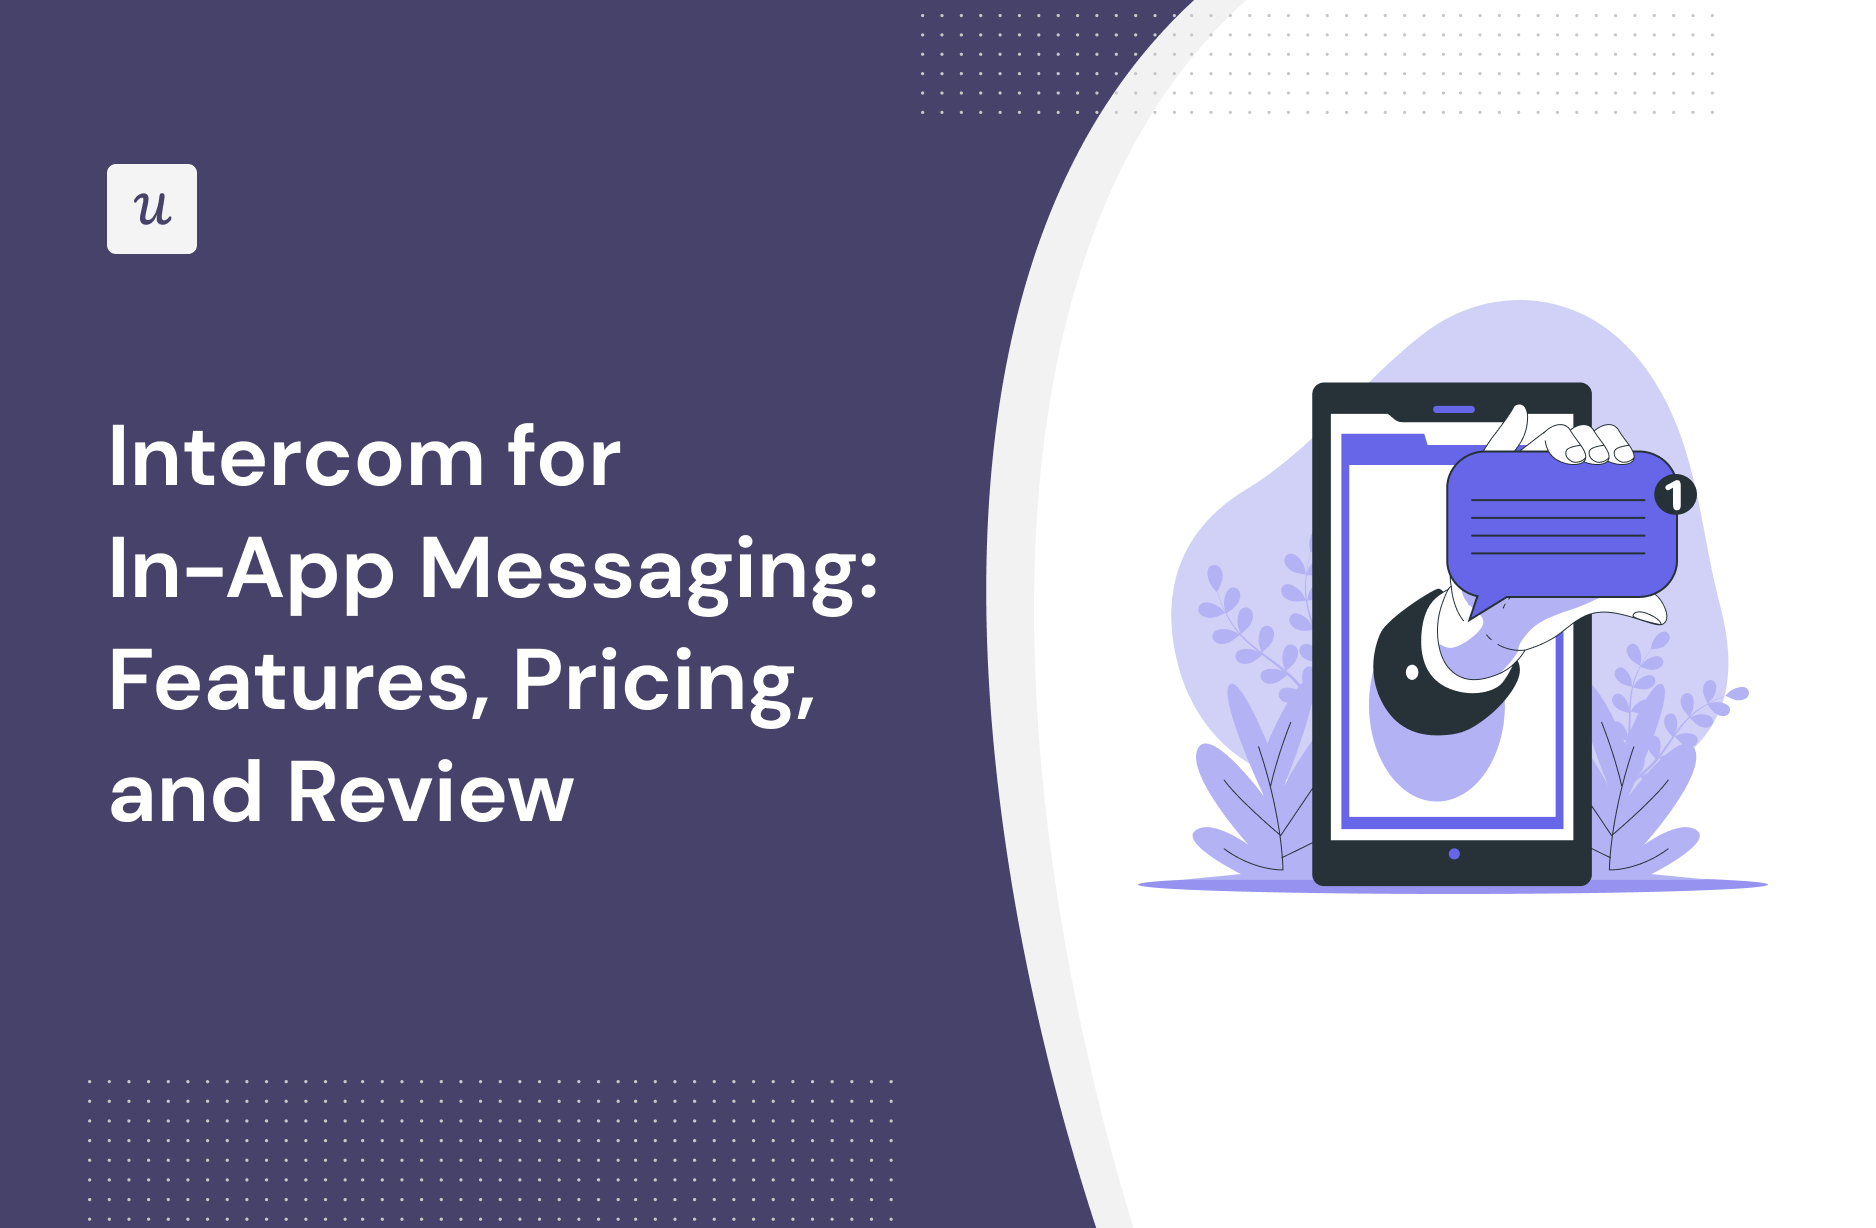 Intercom for In-app messaging: Features, Pricing, and Review